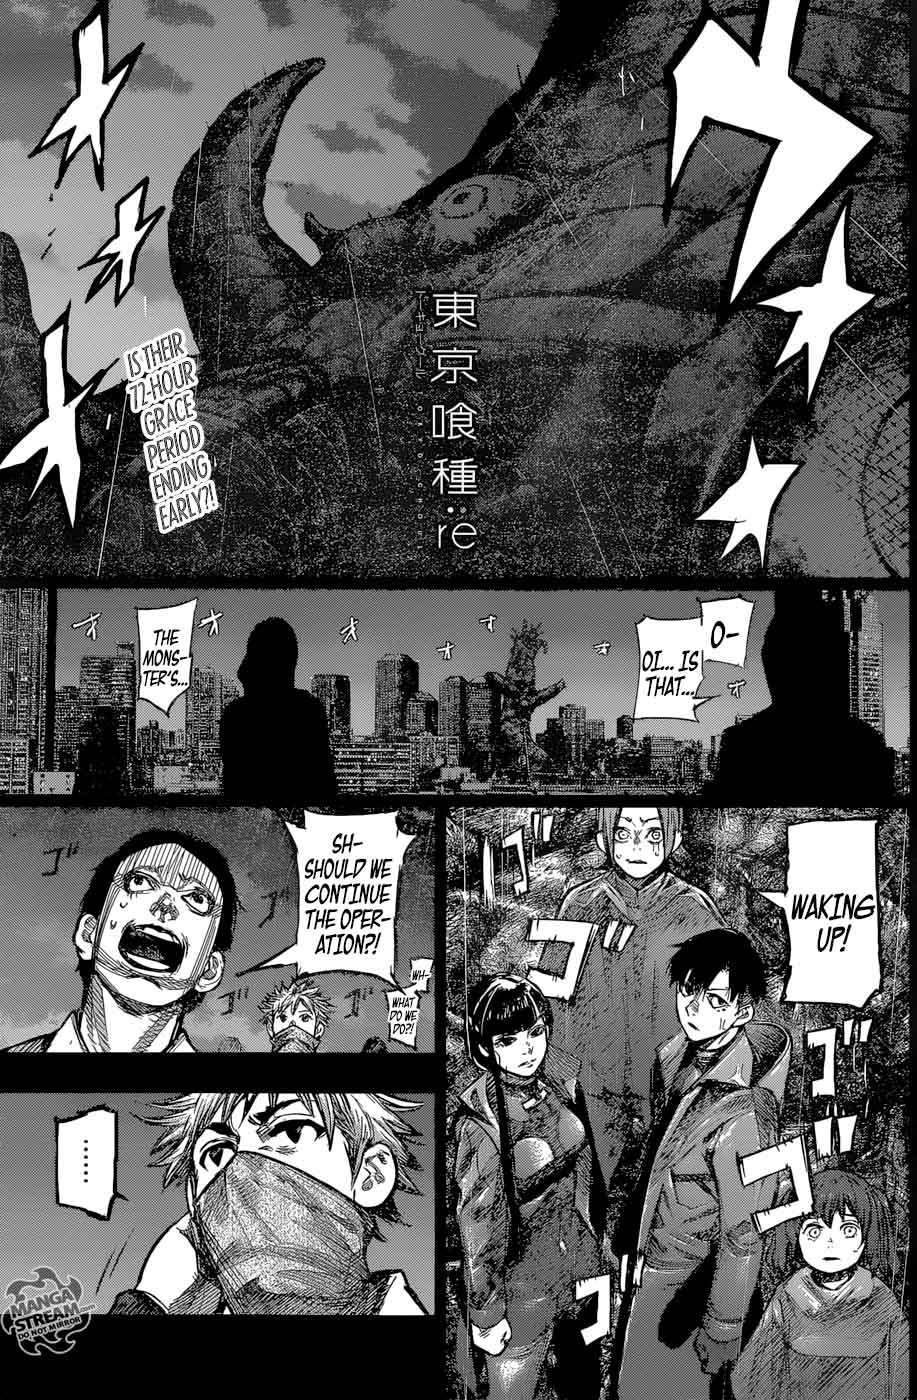 Tokyo Ghoul Re Chapter 153 One Piece Of Trash Tokyo Ghoul Manga Online